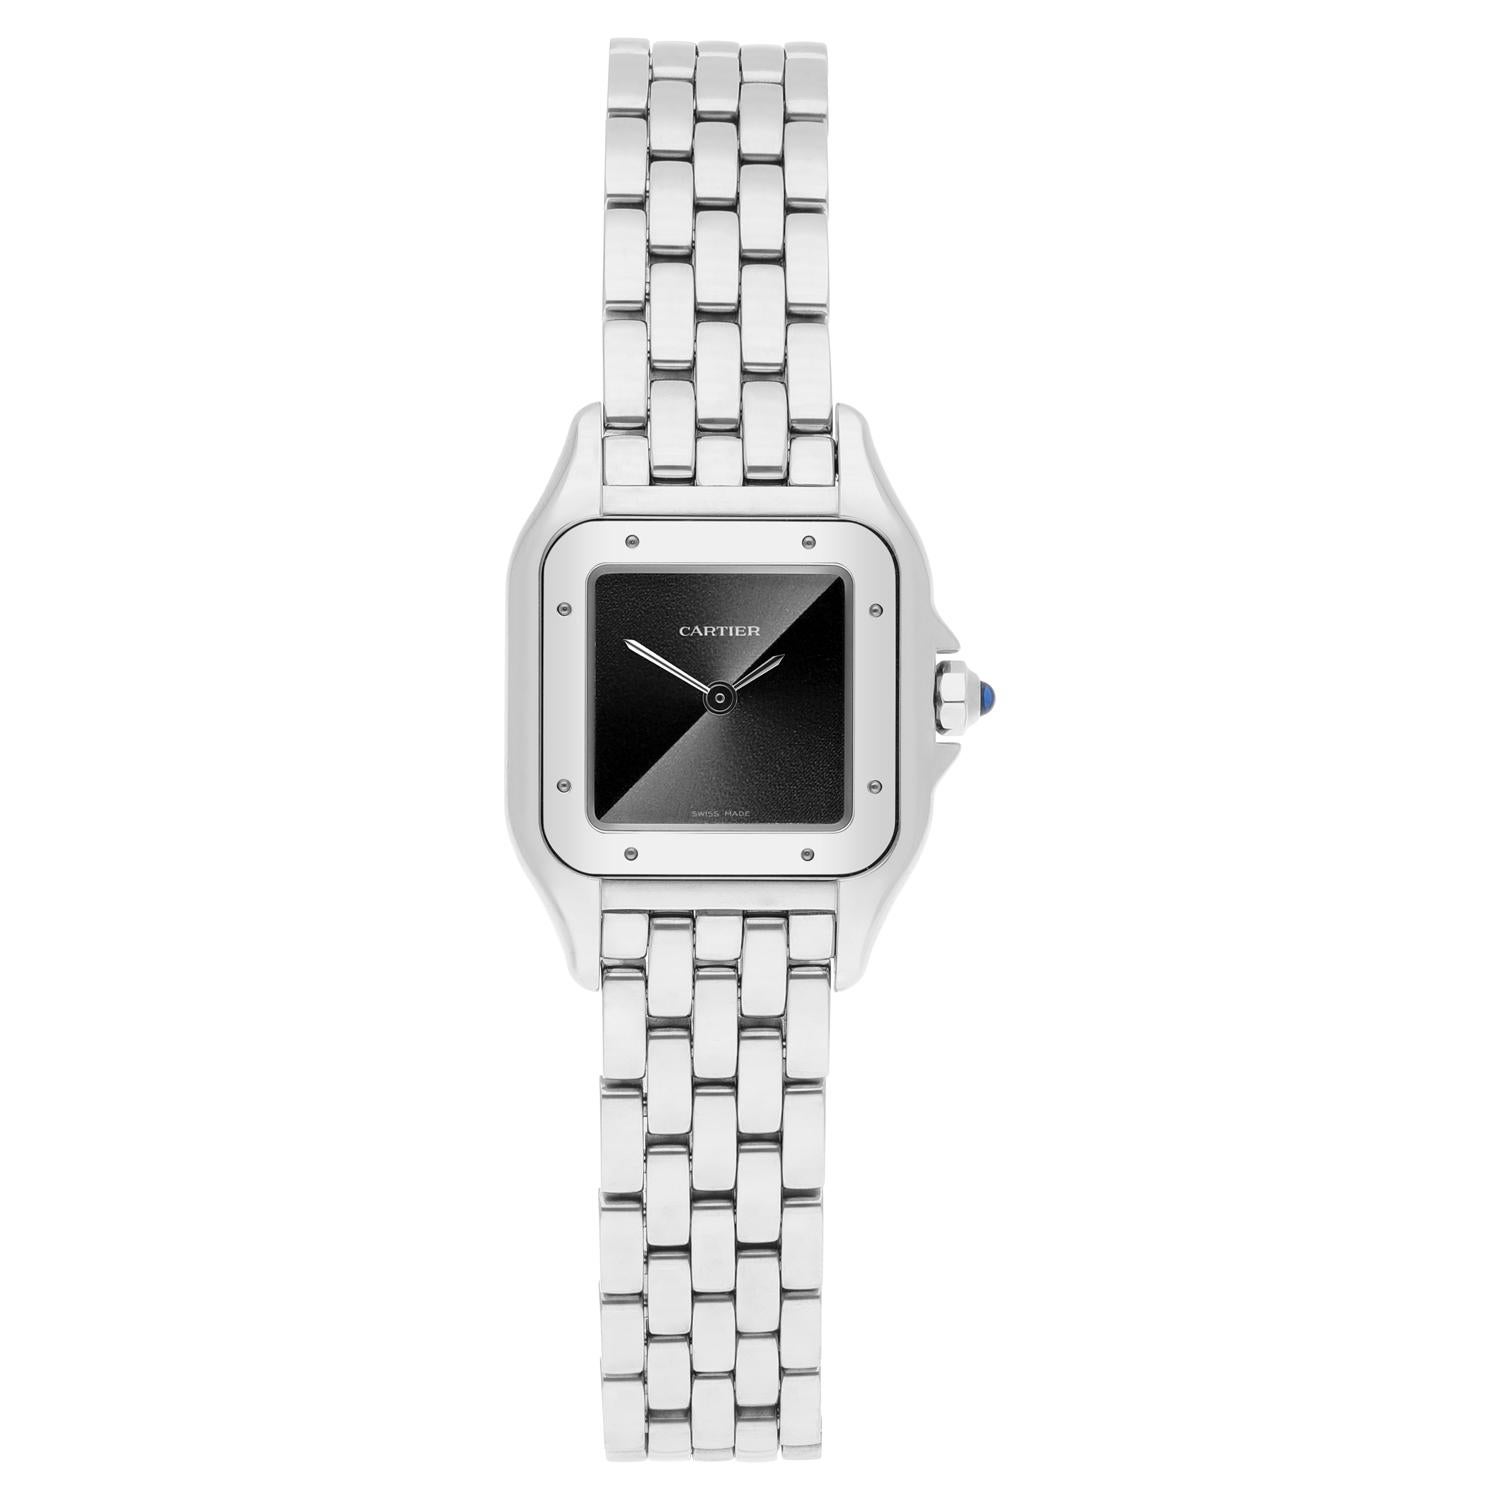 New Ladies Cartier Panthere De Cartier Small Gray Dial Steel Watch WSPN0010 2022

Elevate your style with this stunning ladies' wristwatch from Cartier's Panthere De Cartier collection. Crafted from high-quality stainless steel with a polished